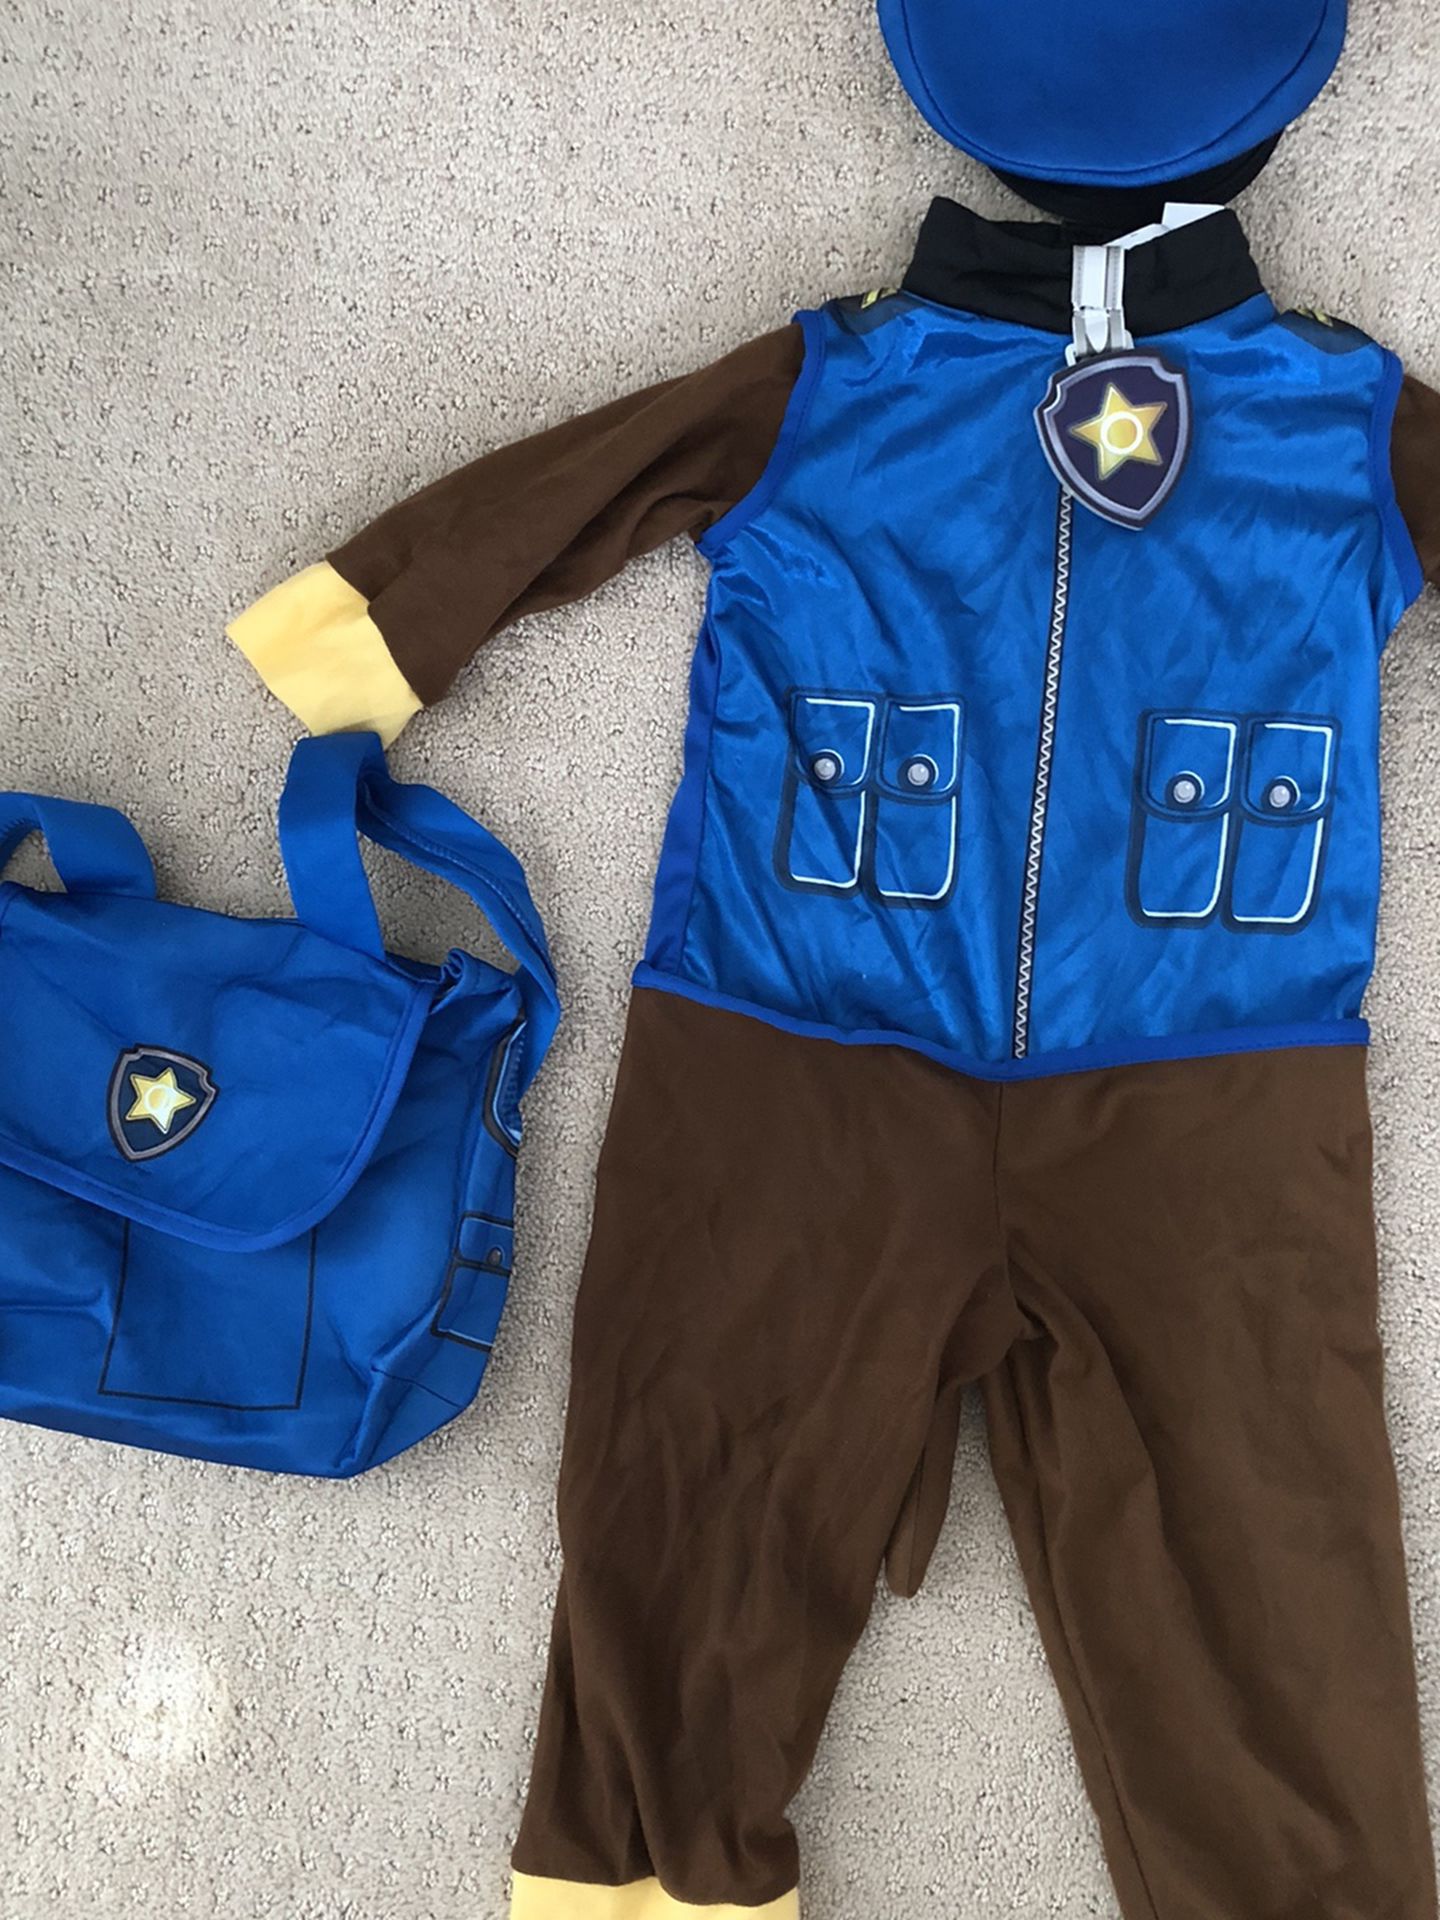 Paw Patrol Costume For Boys Between 3 To 4 Years Old